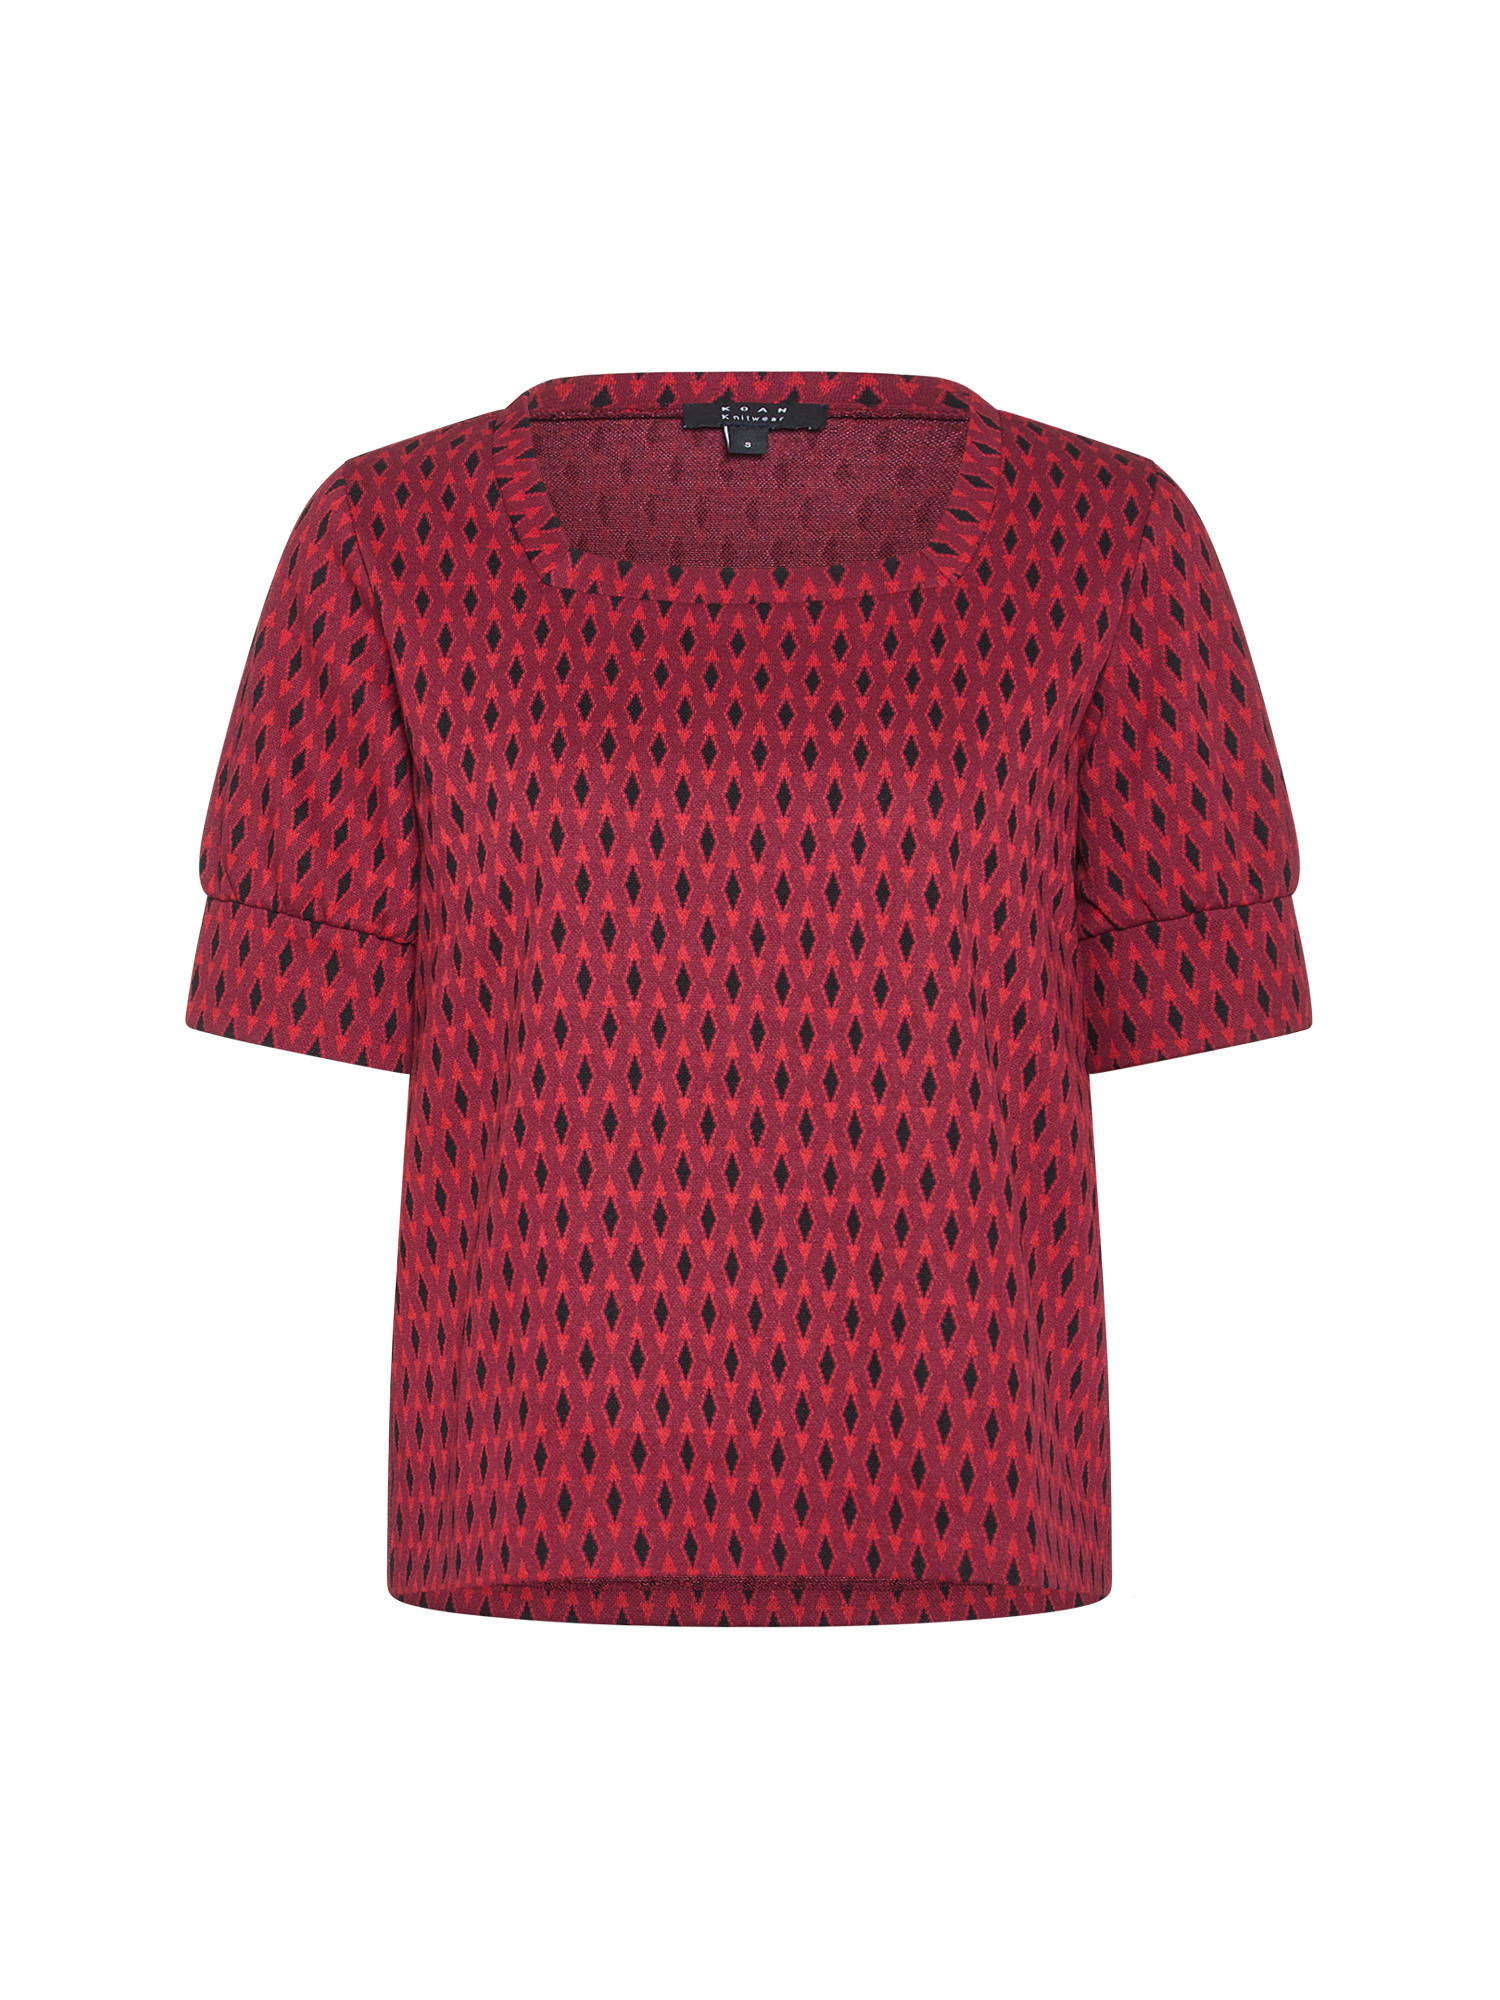 Koan - T-shirt con fantasia a rombi, Rosso, large image number 0